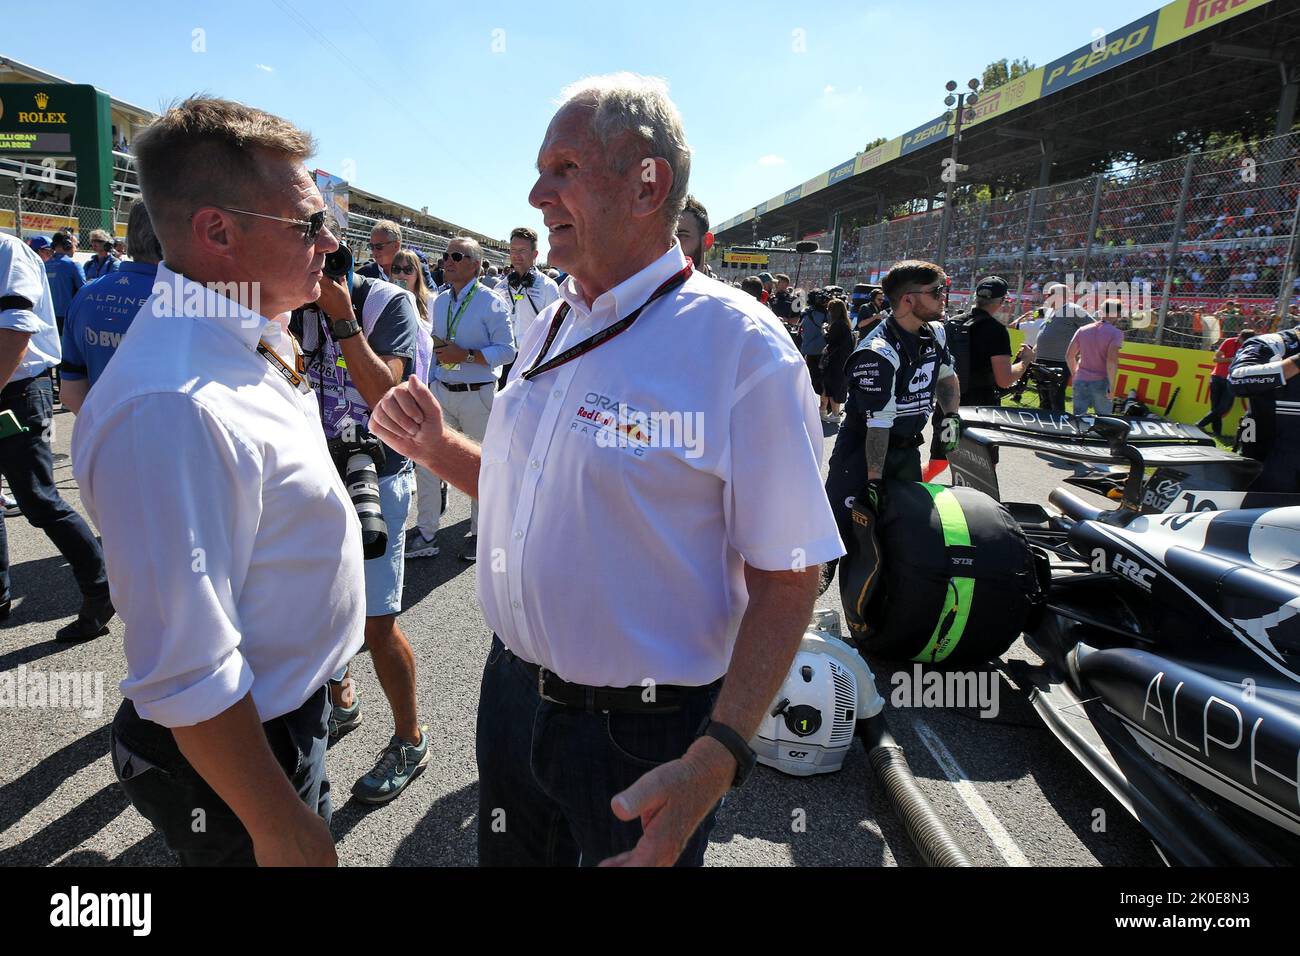 Monza, Italy. 11th Sep, 2022. (L to R): Mika Salo (FIN) with Dr Helmut Marko (AUT) Red Bull Motorsport Consultant on the grid. Italian Grand Prix, Sunday 11th September 2022. Monza Italy. Credit: James Moy/Alamy Live News Stock Photo